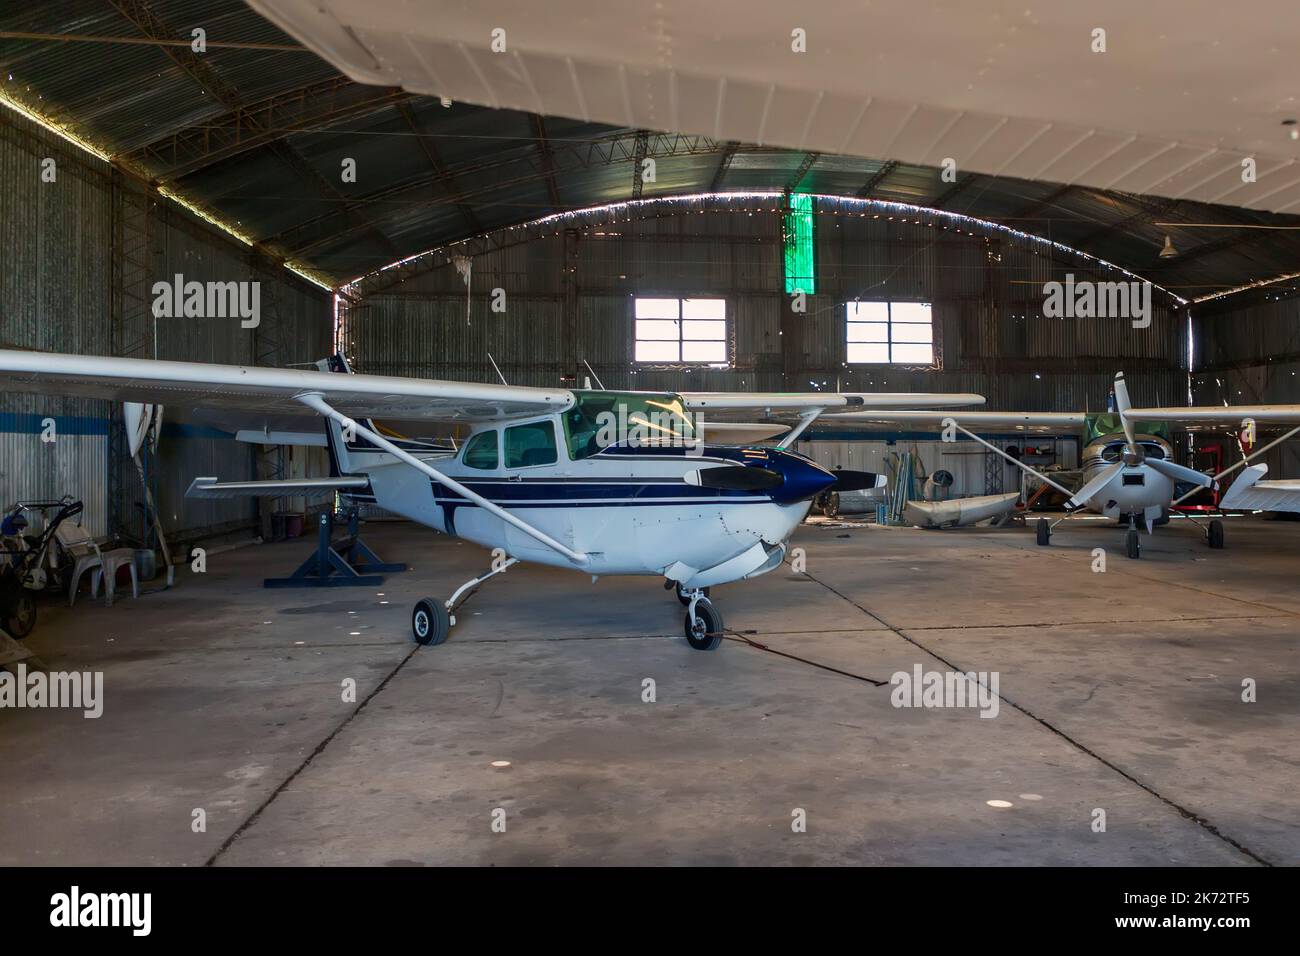 old angar with several airplanes ready for flight. Stock Photo